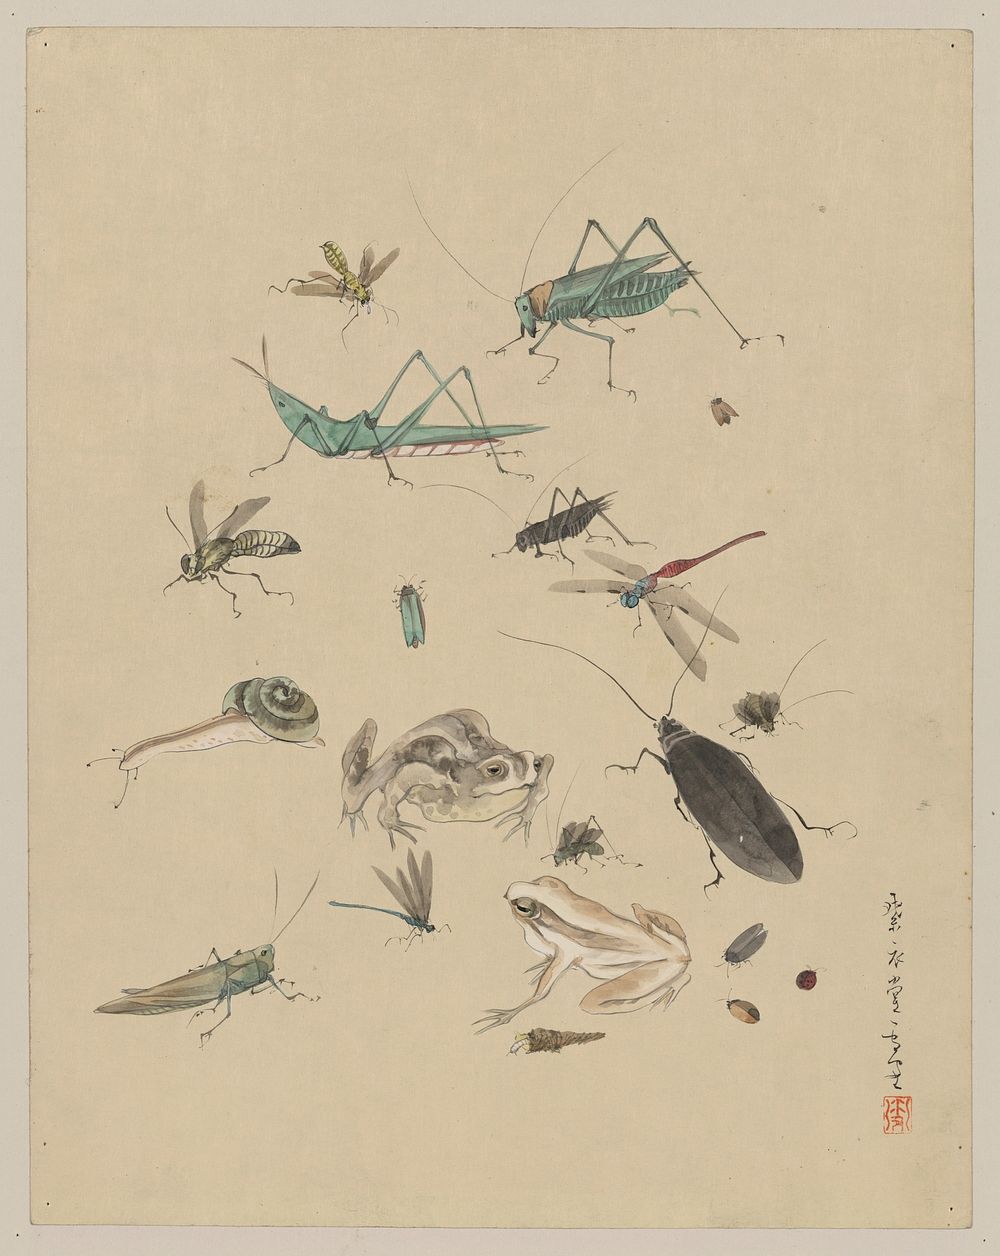 [Frogs, snails, and insects, including grasshoppers, beetles, wasps, and dragonflies]. Original from the Library of Congress.